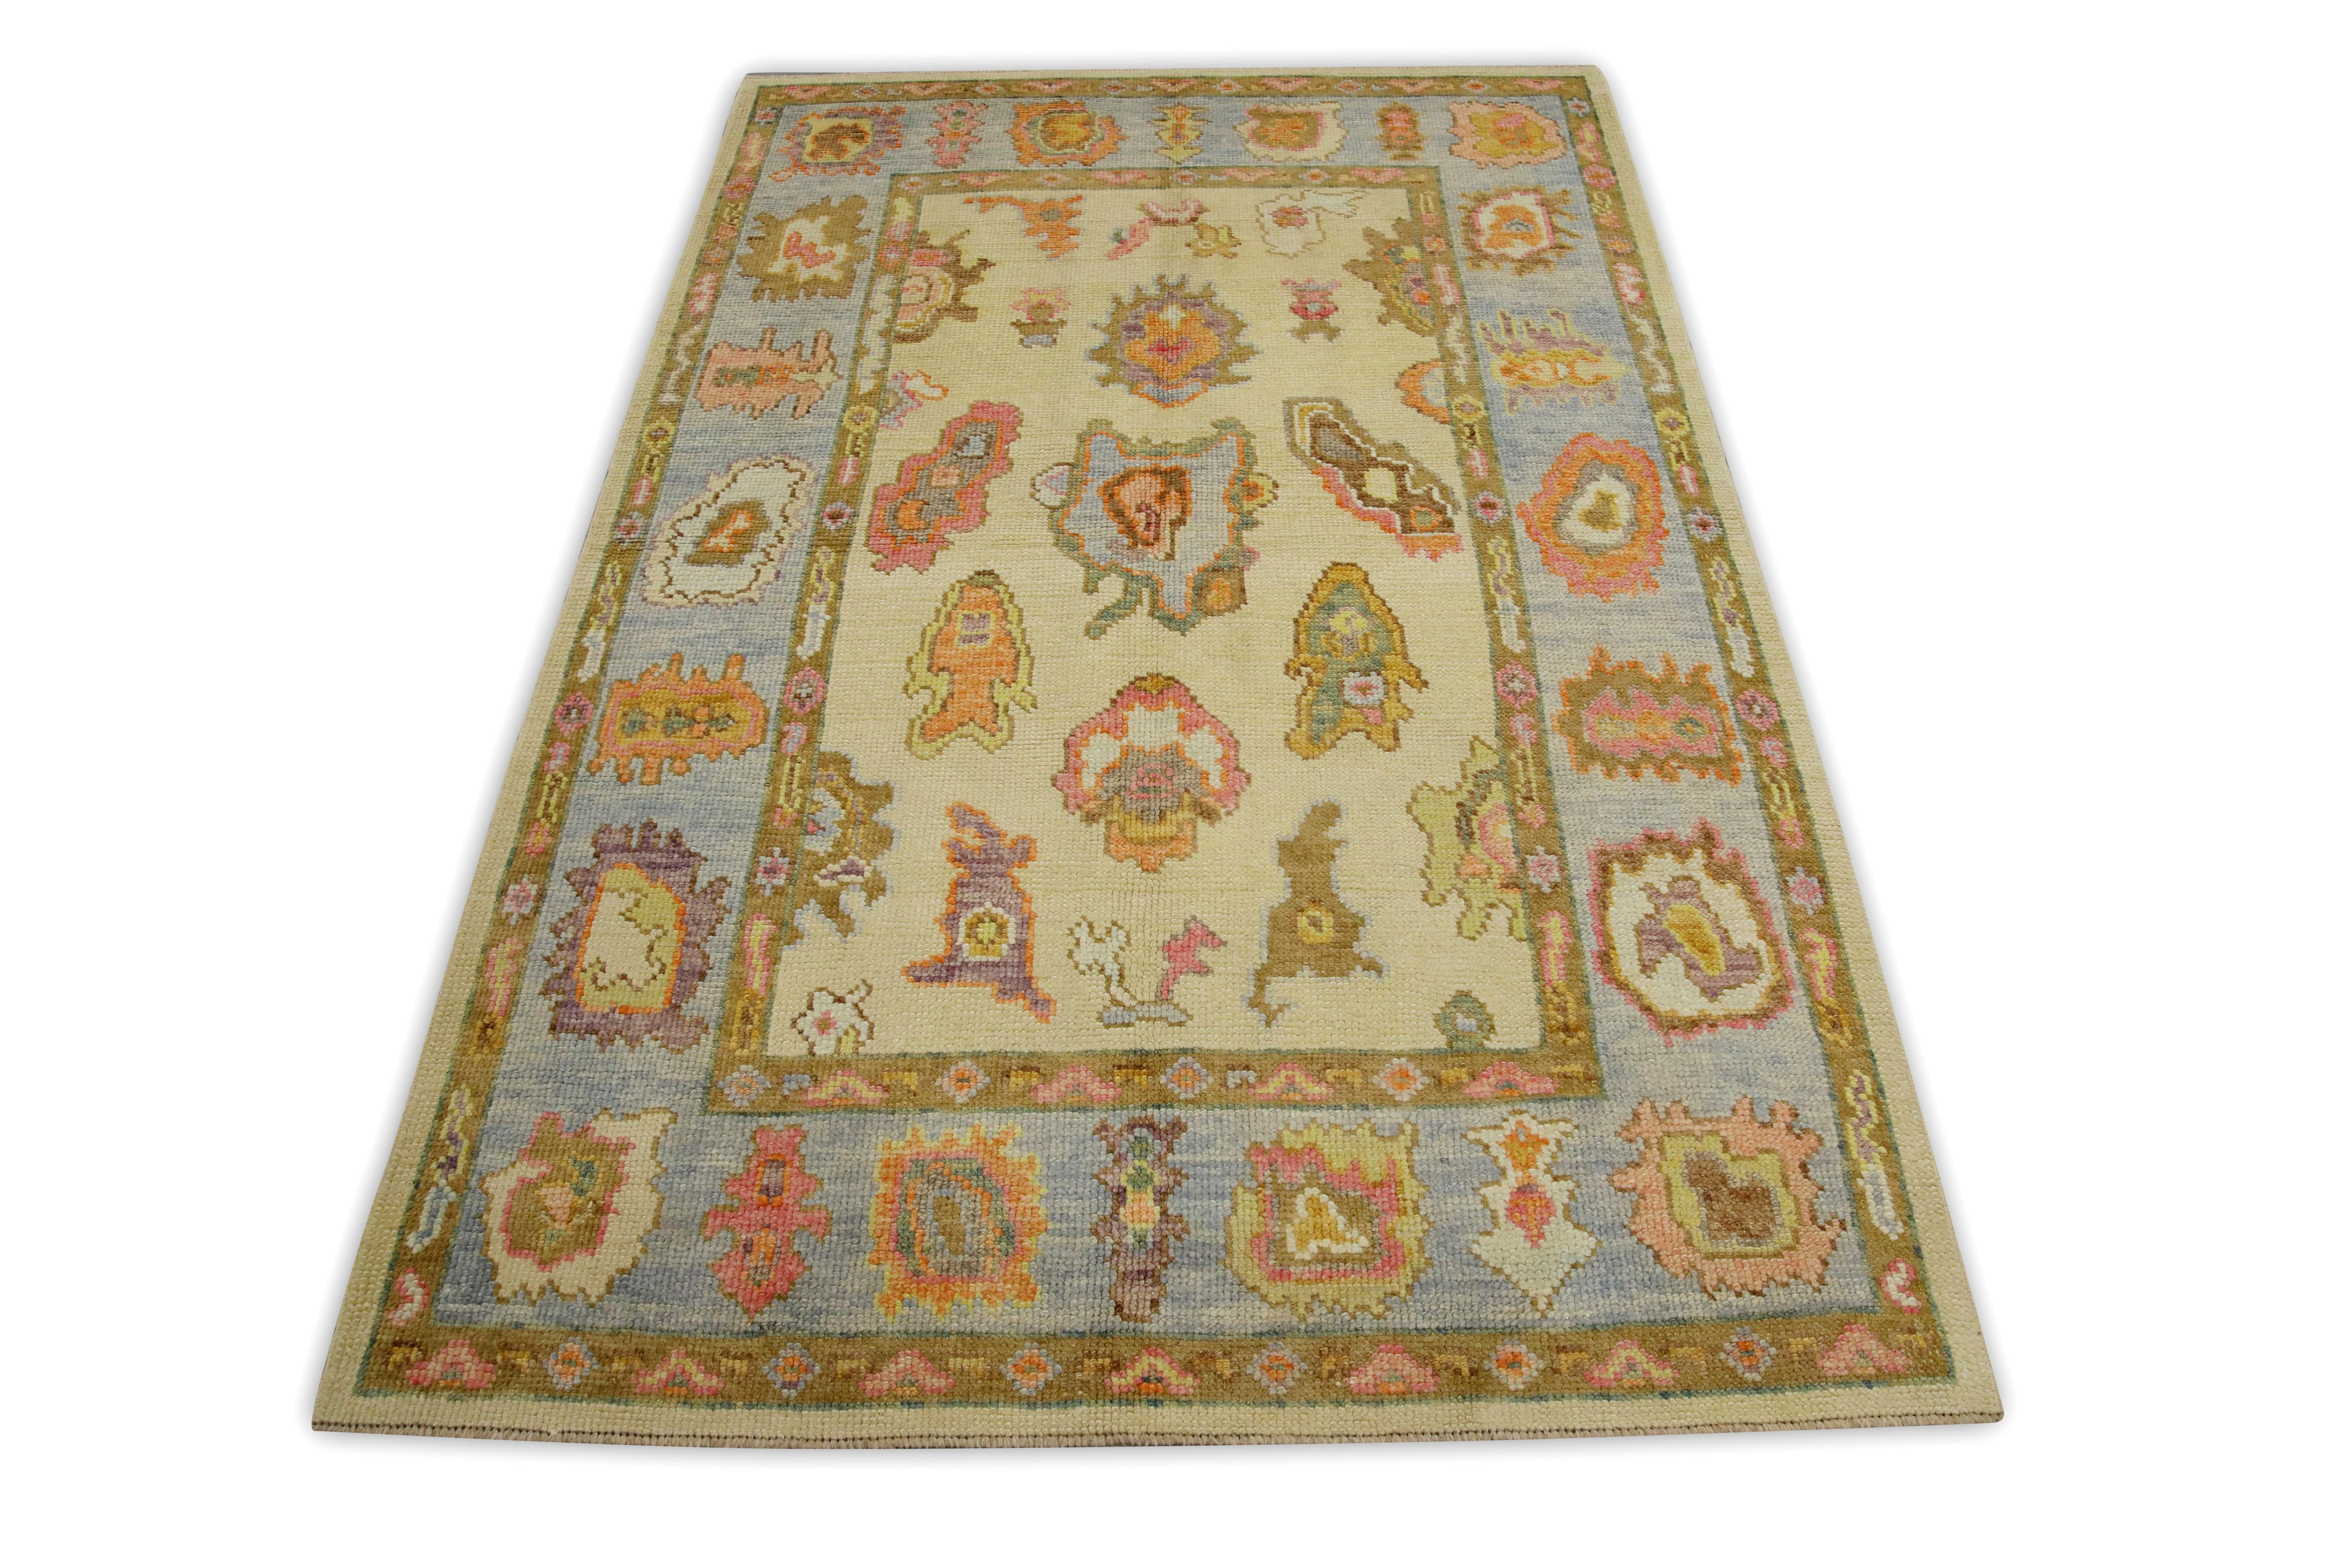 Contemporary Pink & Blue Floral Design Handwoven Wool Turkish Oushak Rug 4'1